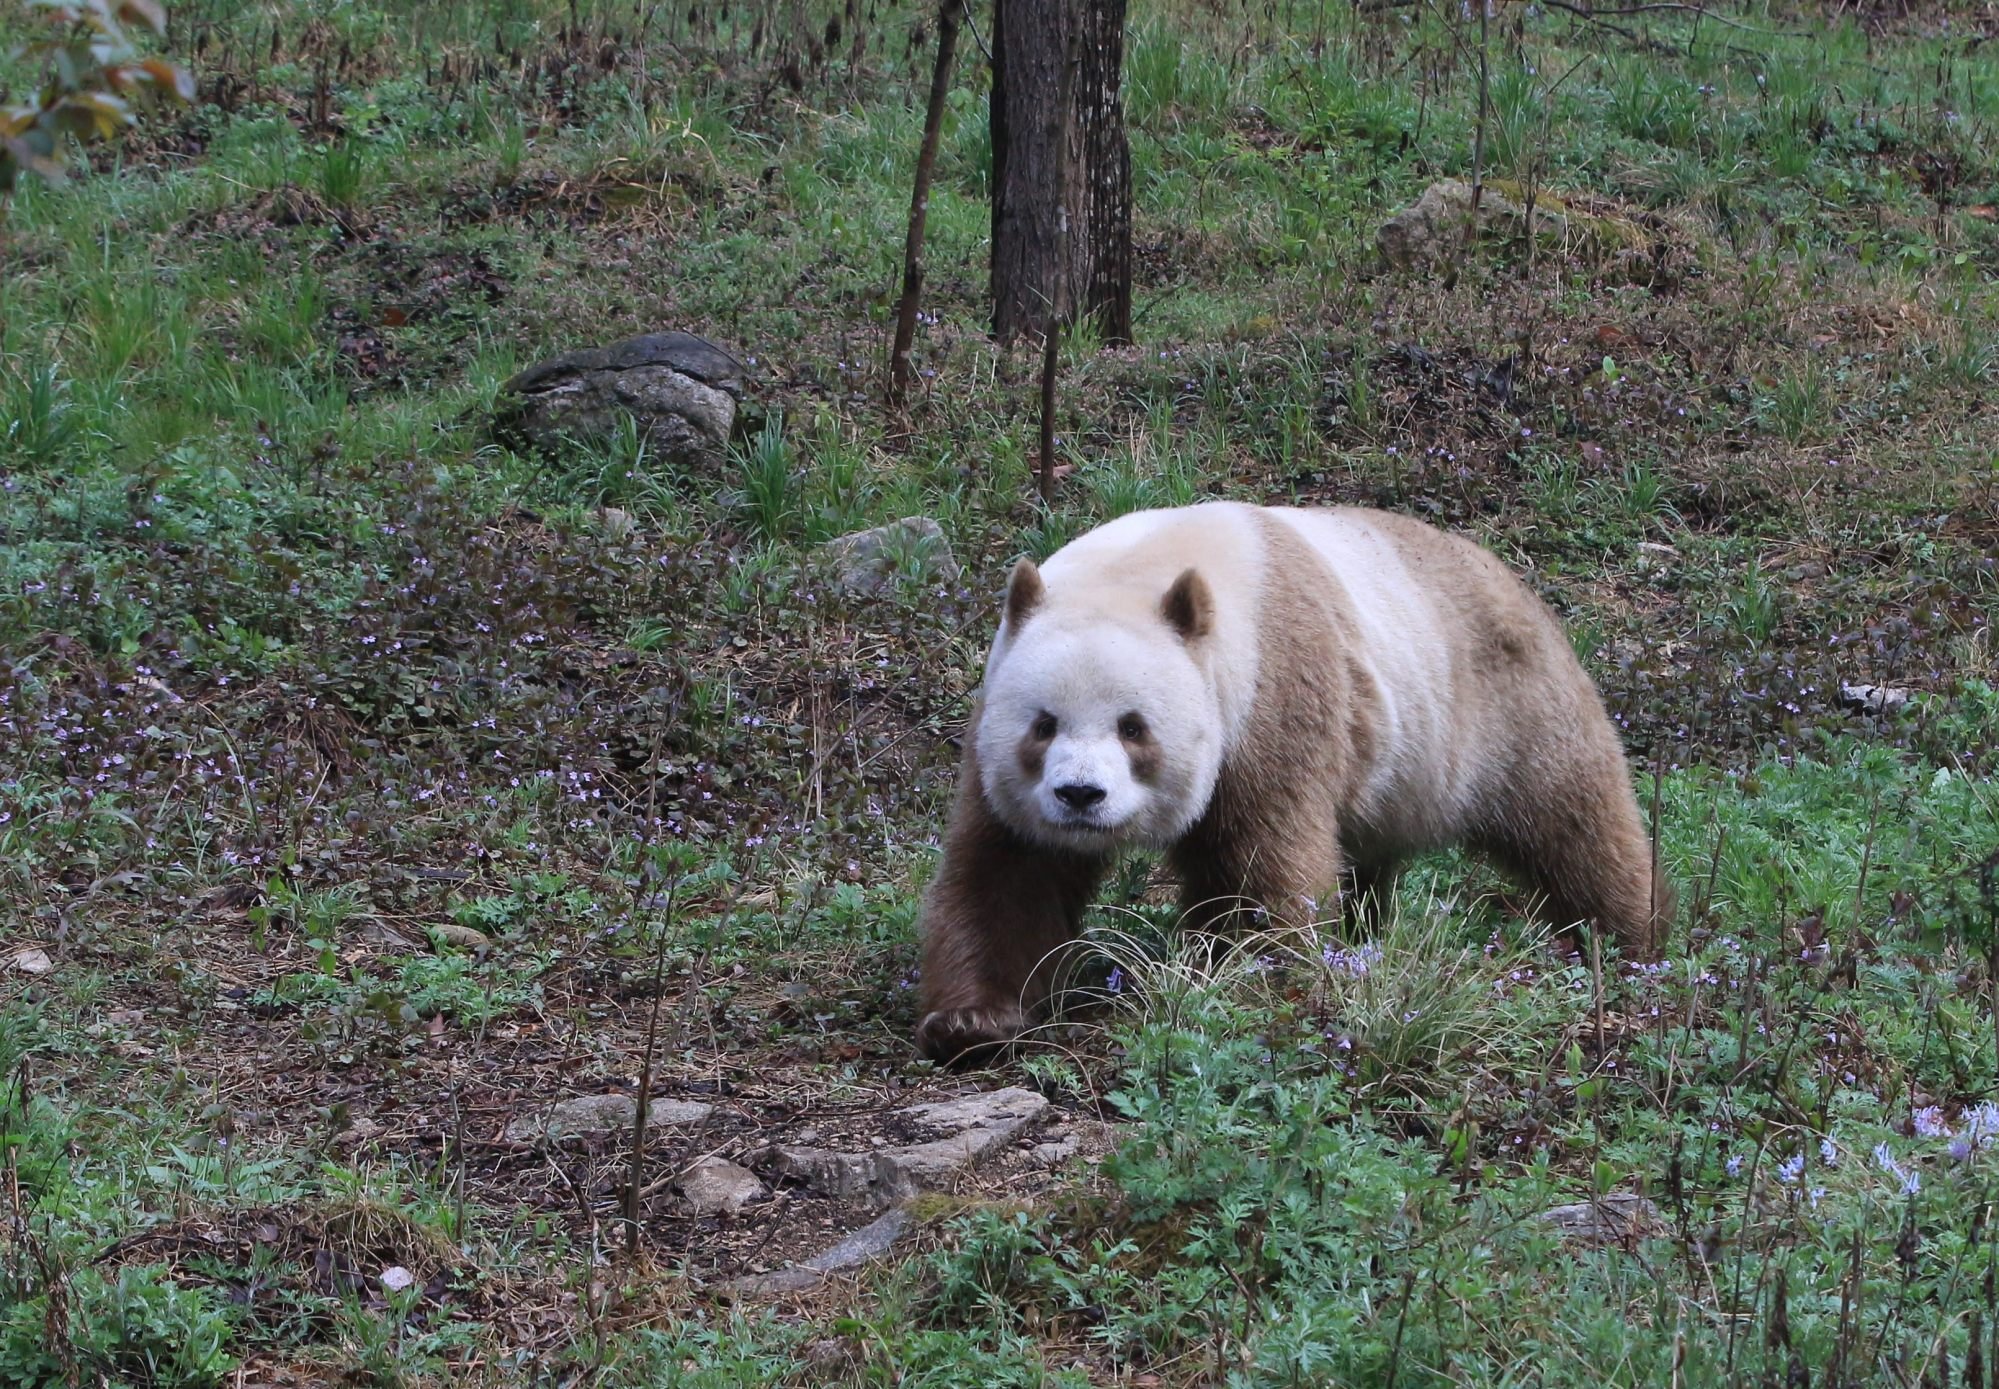 Brown pandas like Qizai, pictured here, also have smaller skulls than their black-and-white counterparts, according to scientists. Photo: Zhou Wenliang / Chinese Academy of Sciences Institute of Zoology